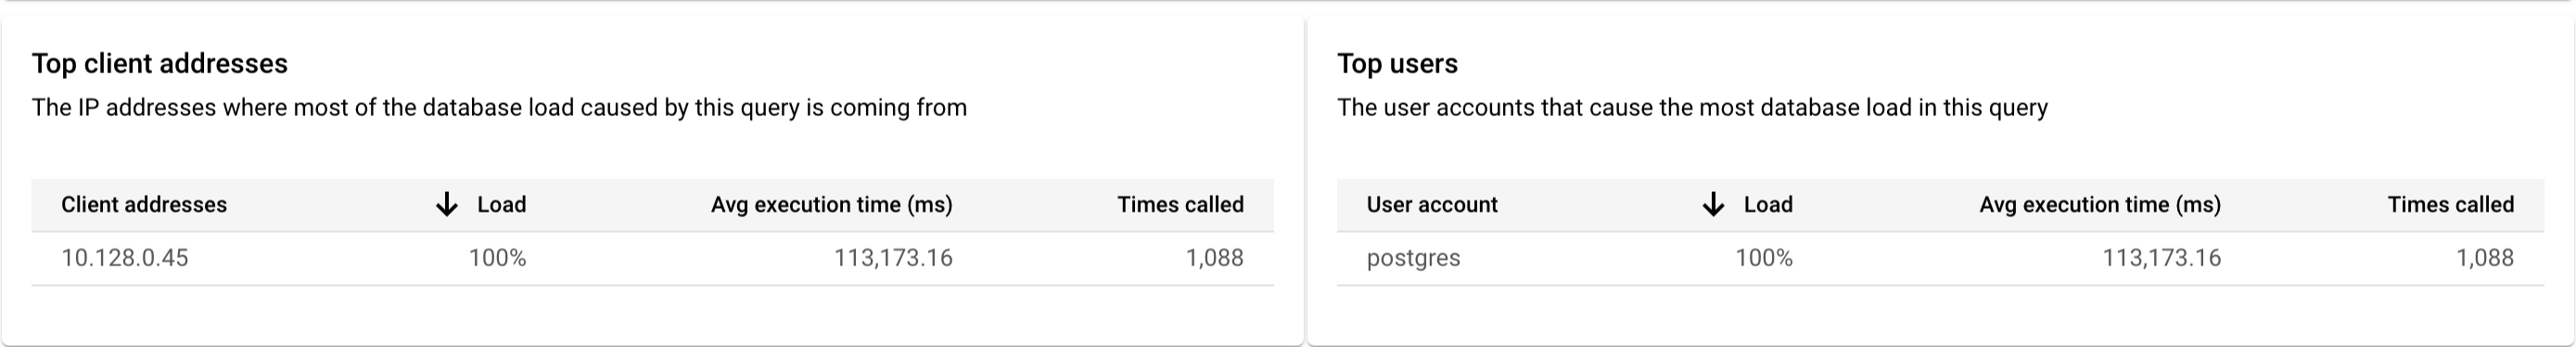 Figure 13. The image shows that for top client addresses, the load was
         100%, the average execution time was 19,568 seconds, and the times
         called was 1,226. For top users, the user postgres had 100% of the load,
         had an average execution time of 19,568 ms, and was called 1,226
         times.